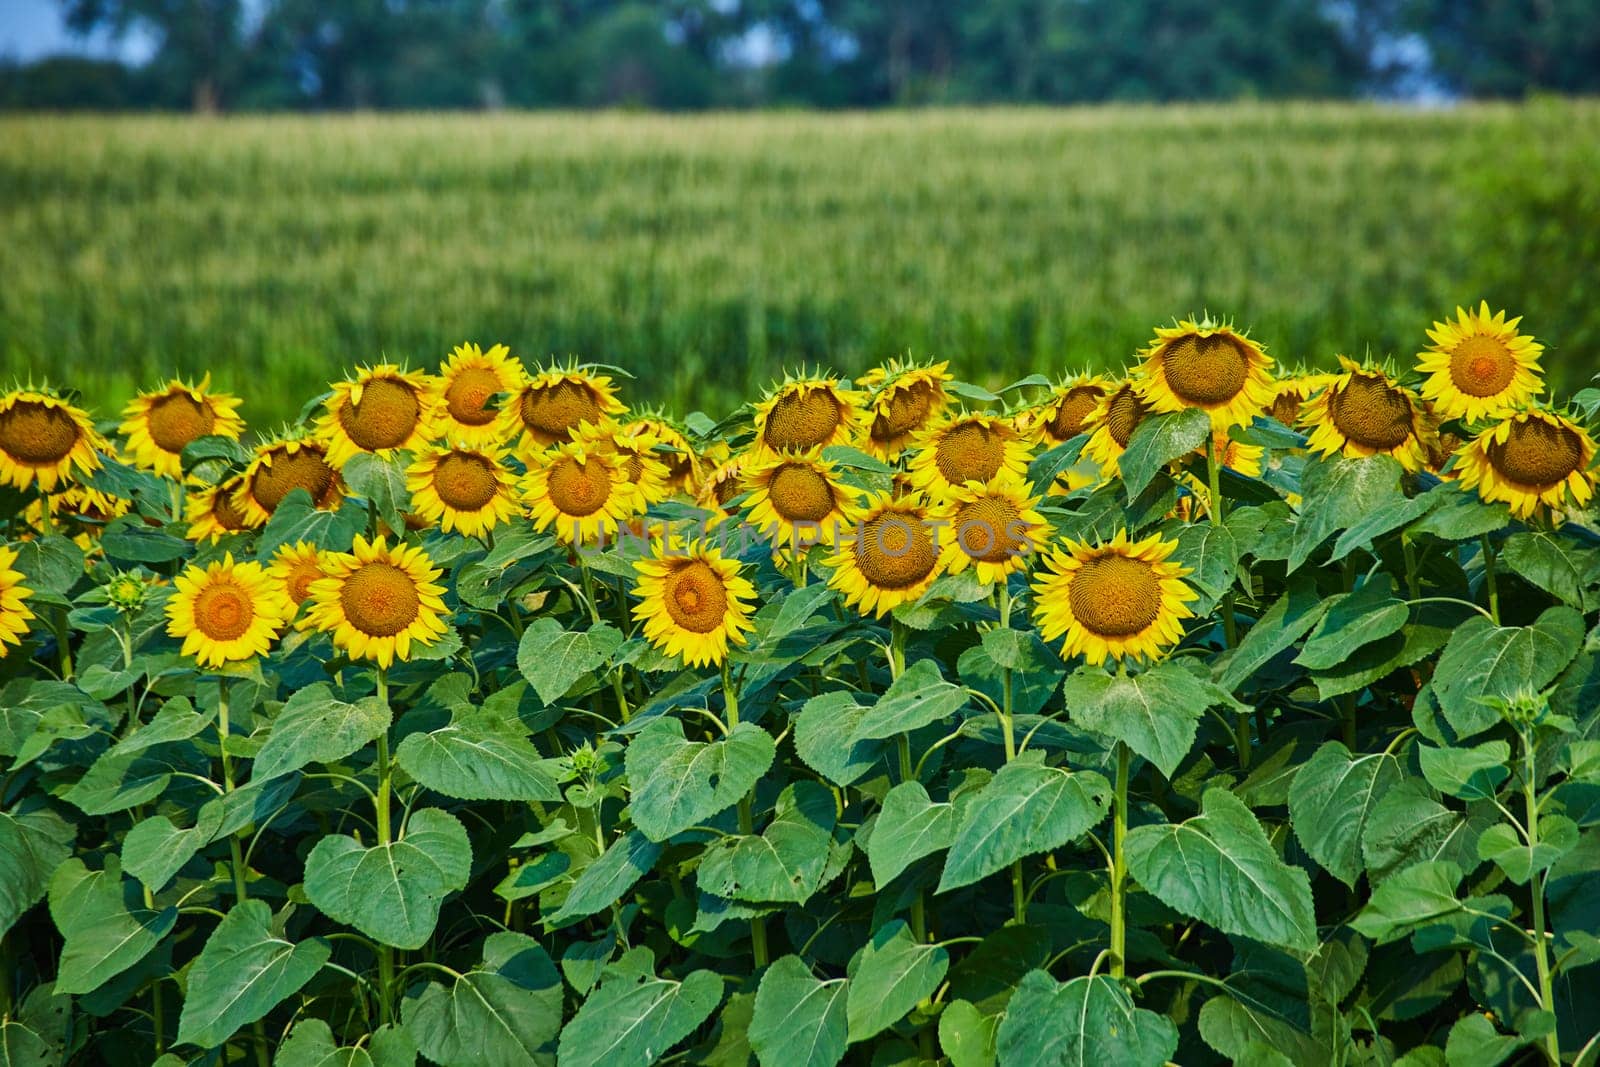 Image of Rows of sunflowers with giant yellow petals and blurry cornfield in distance with forest behind